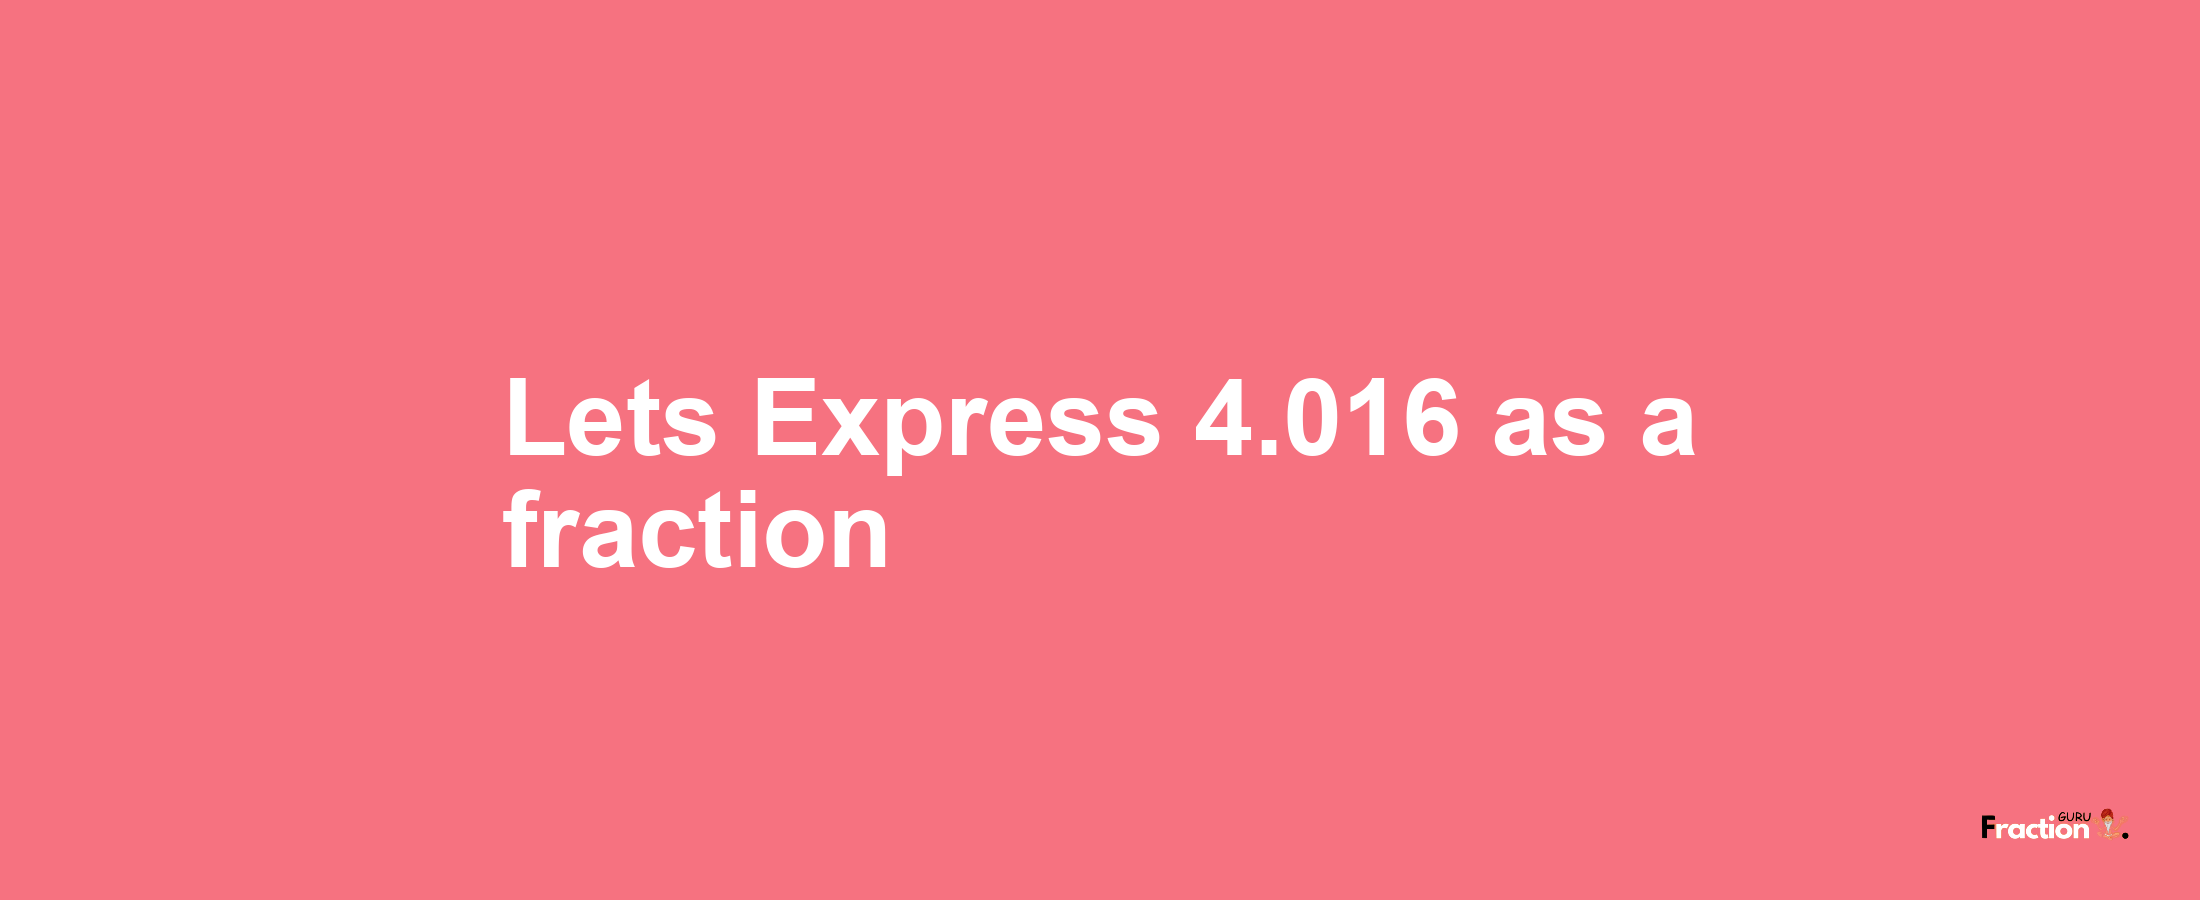 Lets Express 4.016 as afraction